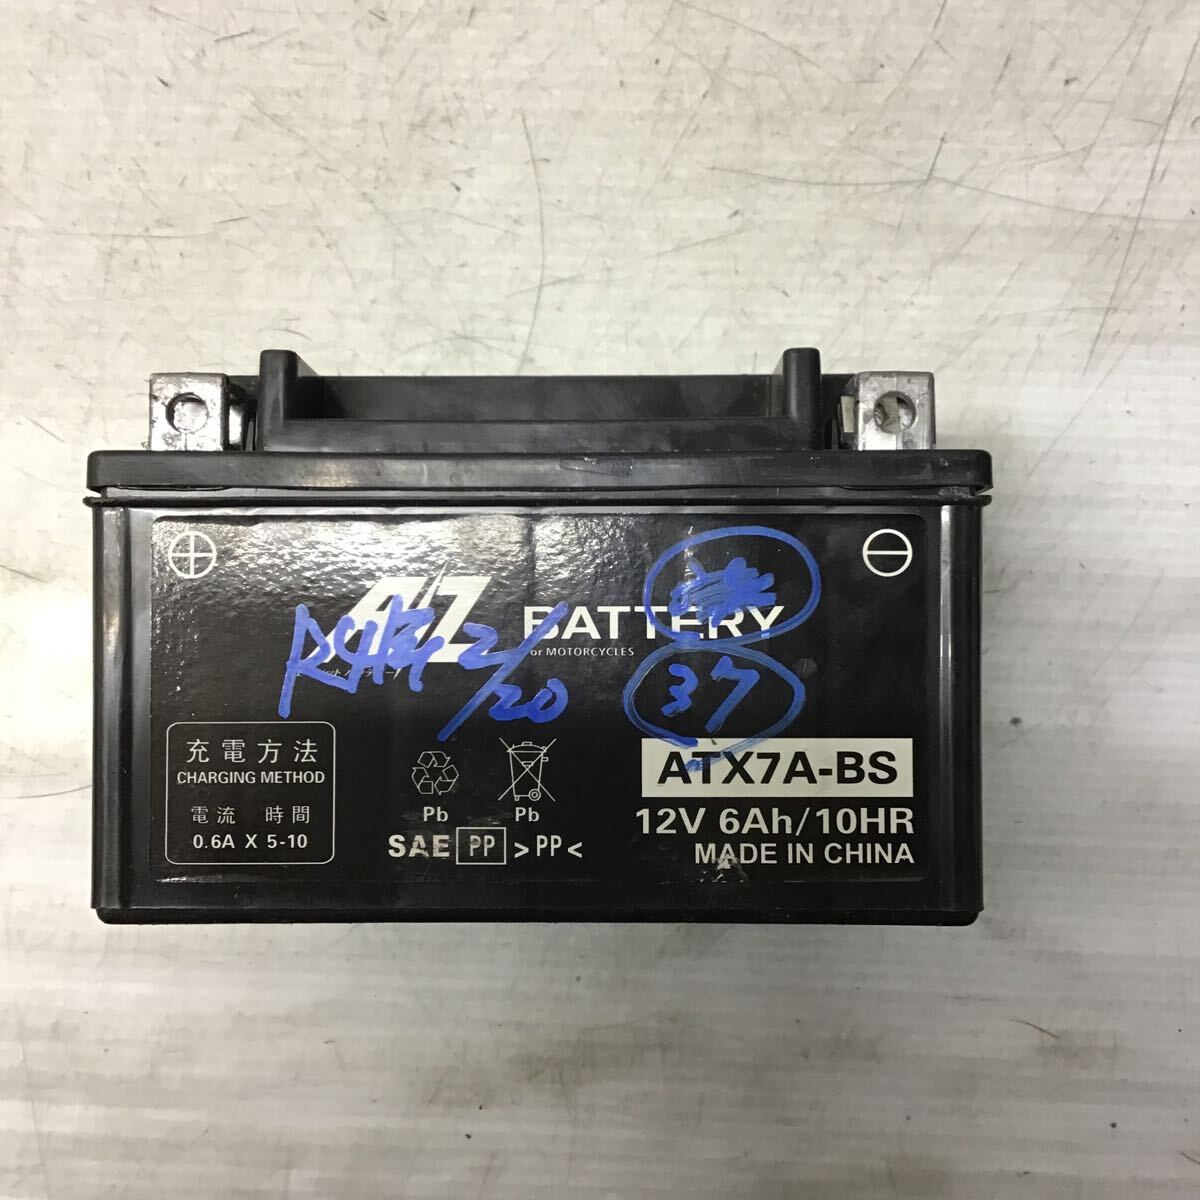 H62-9 バイク用 バッテリー ATX7A-BS YTX7A-BS 中古 良品 テスターにて測定済み_画像1